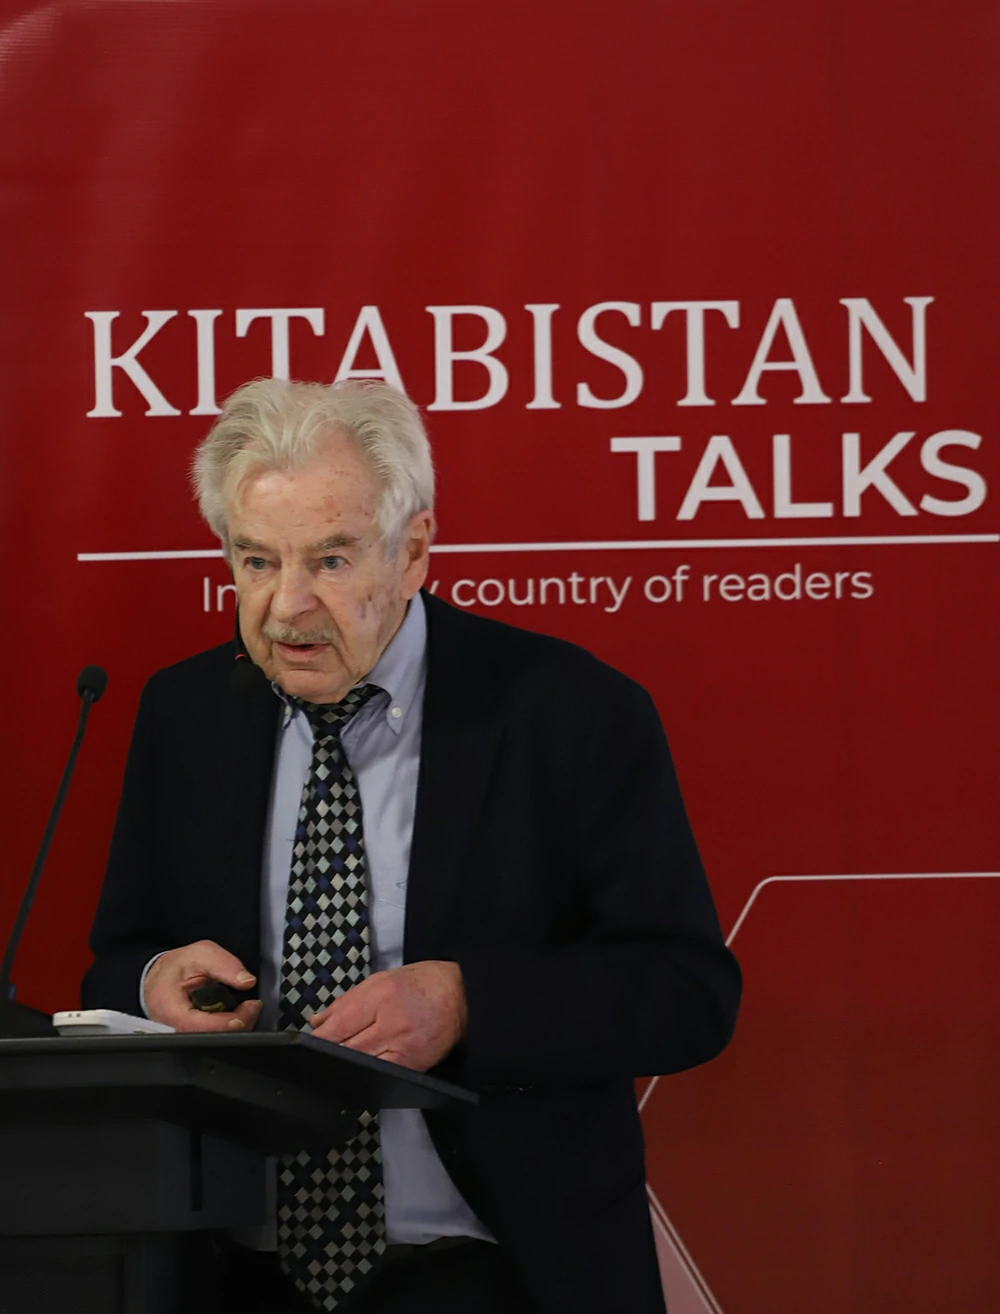 Profeddor Wolf Linder giving lecture at Kitabistan Talk. Education in Switzerland and Swiss Democracy.